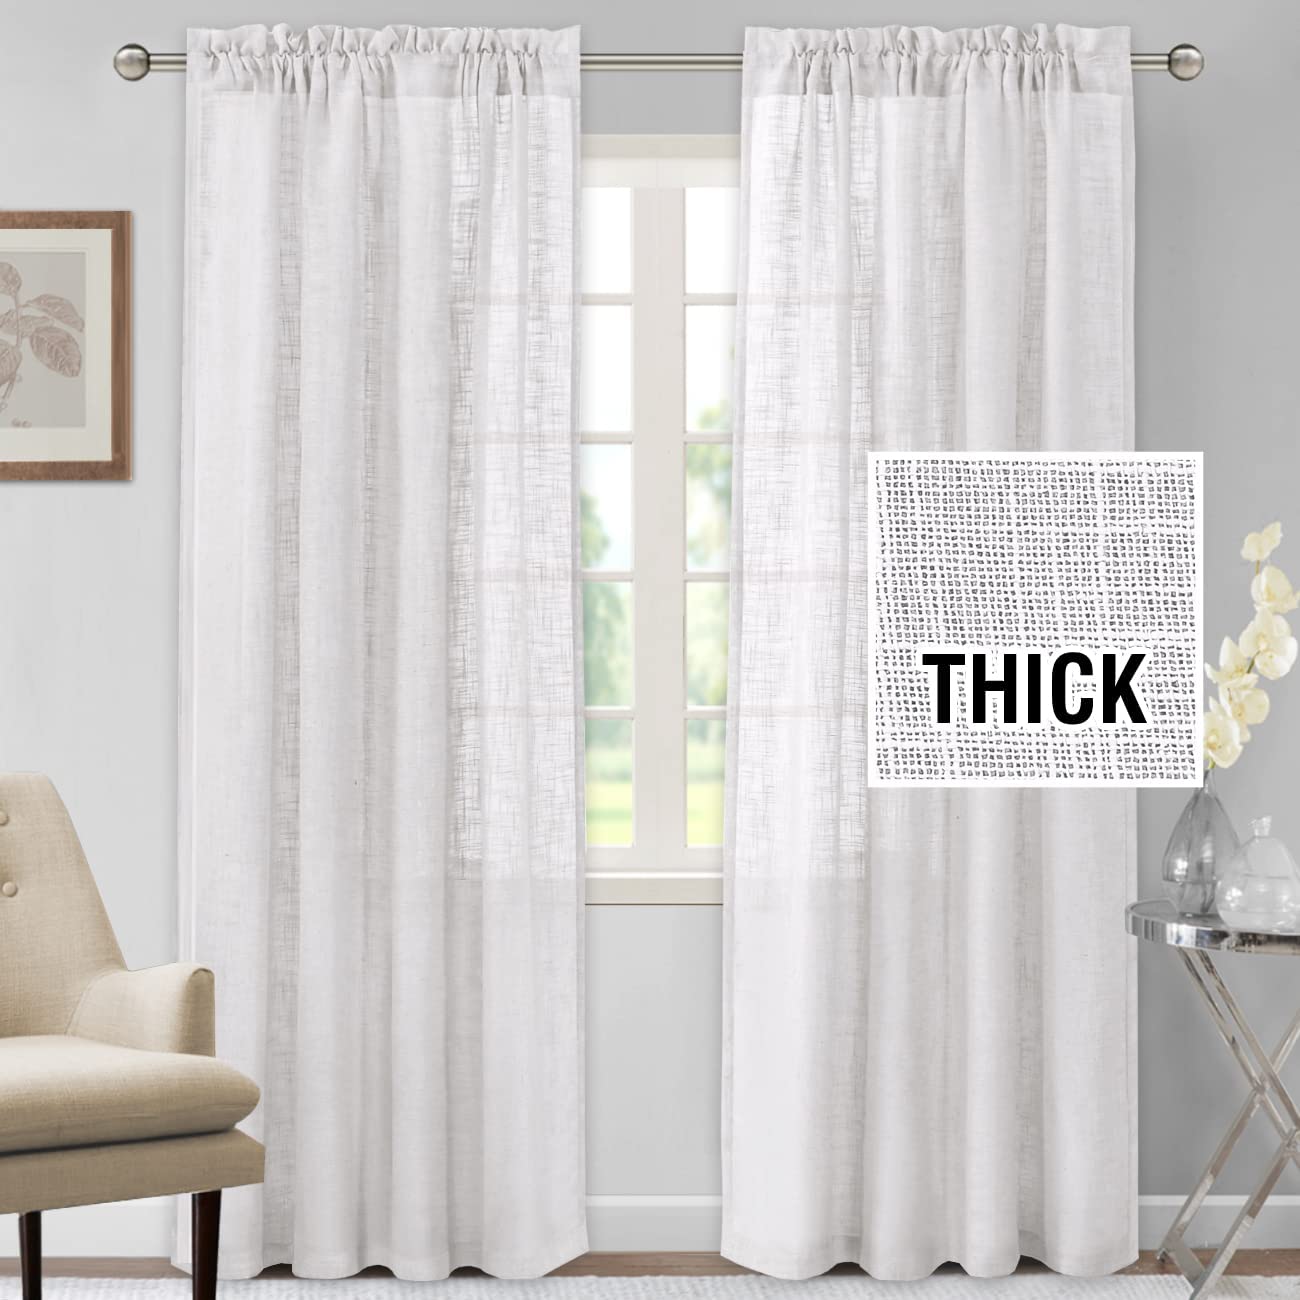 Linen sheer curtains soften the perfectly monochrome interiors of Taf and  Br…  Curtains living room modern, Linen curtains living room, Sheers  curtains living room